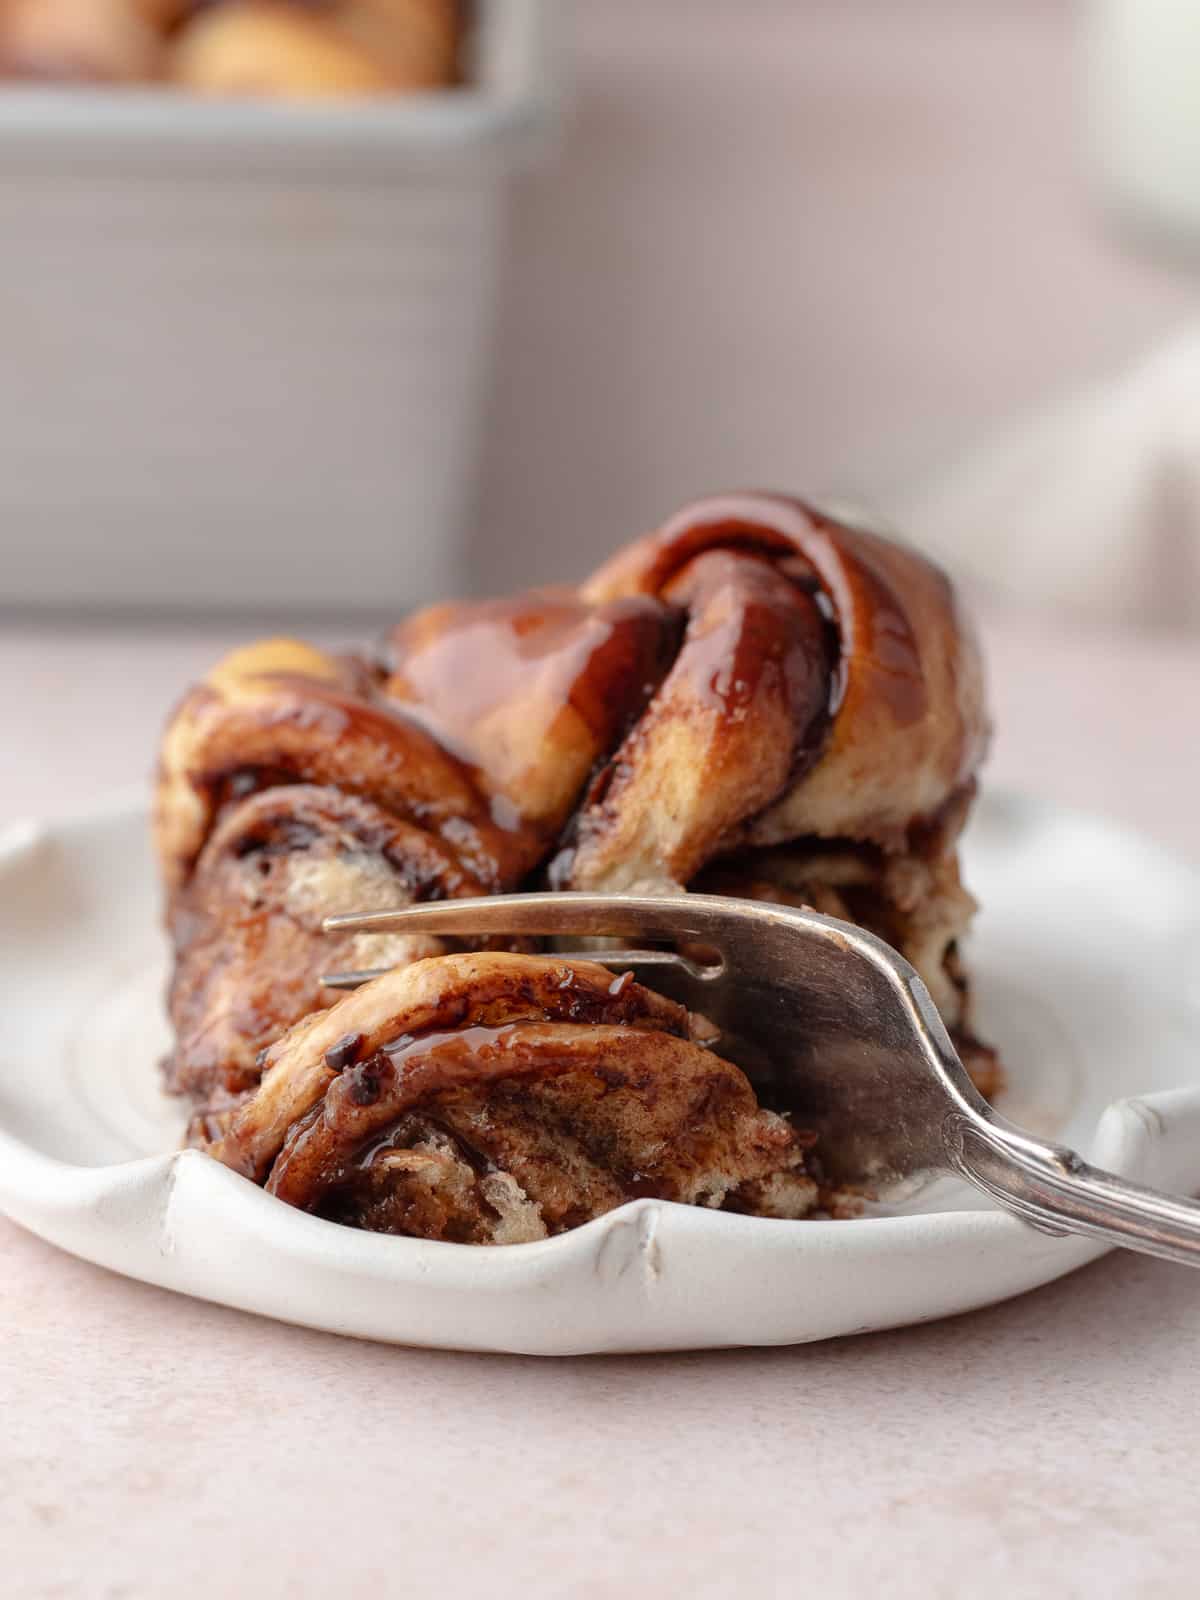 A piece of Nutella knot bun on a plate with a fork